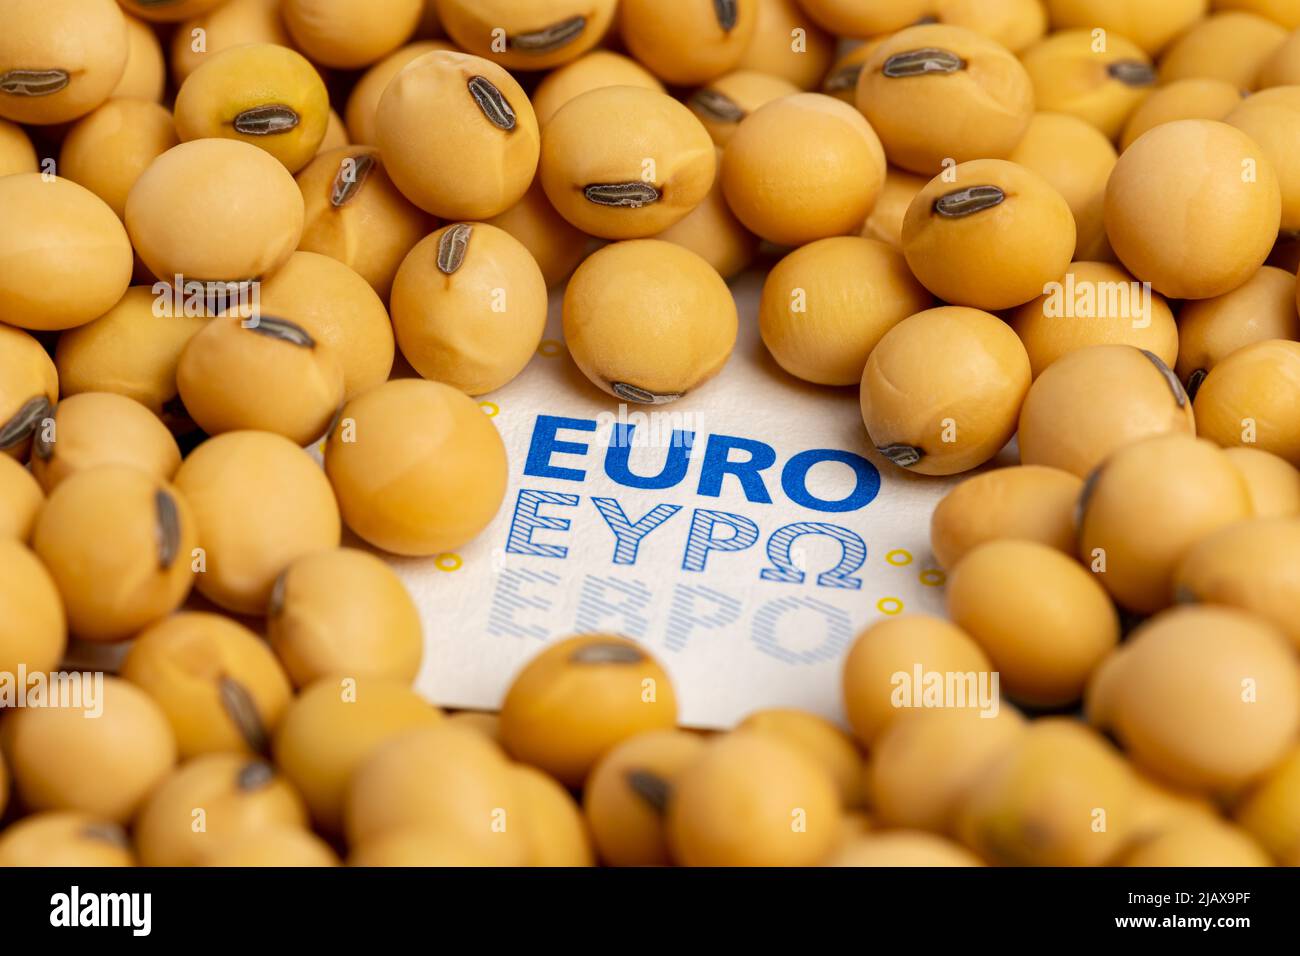 Soybeans and Euro banknote. Agriculture imports and exports, farming and biofuel concept Stock Photo